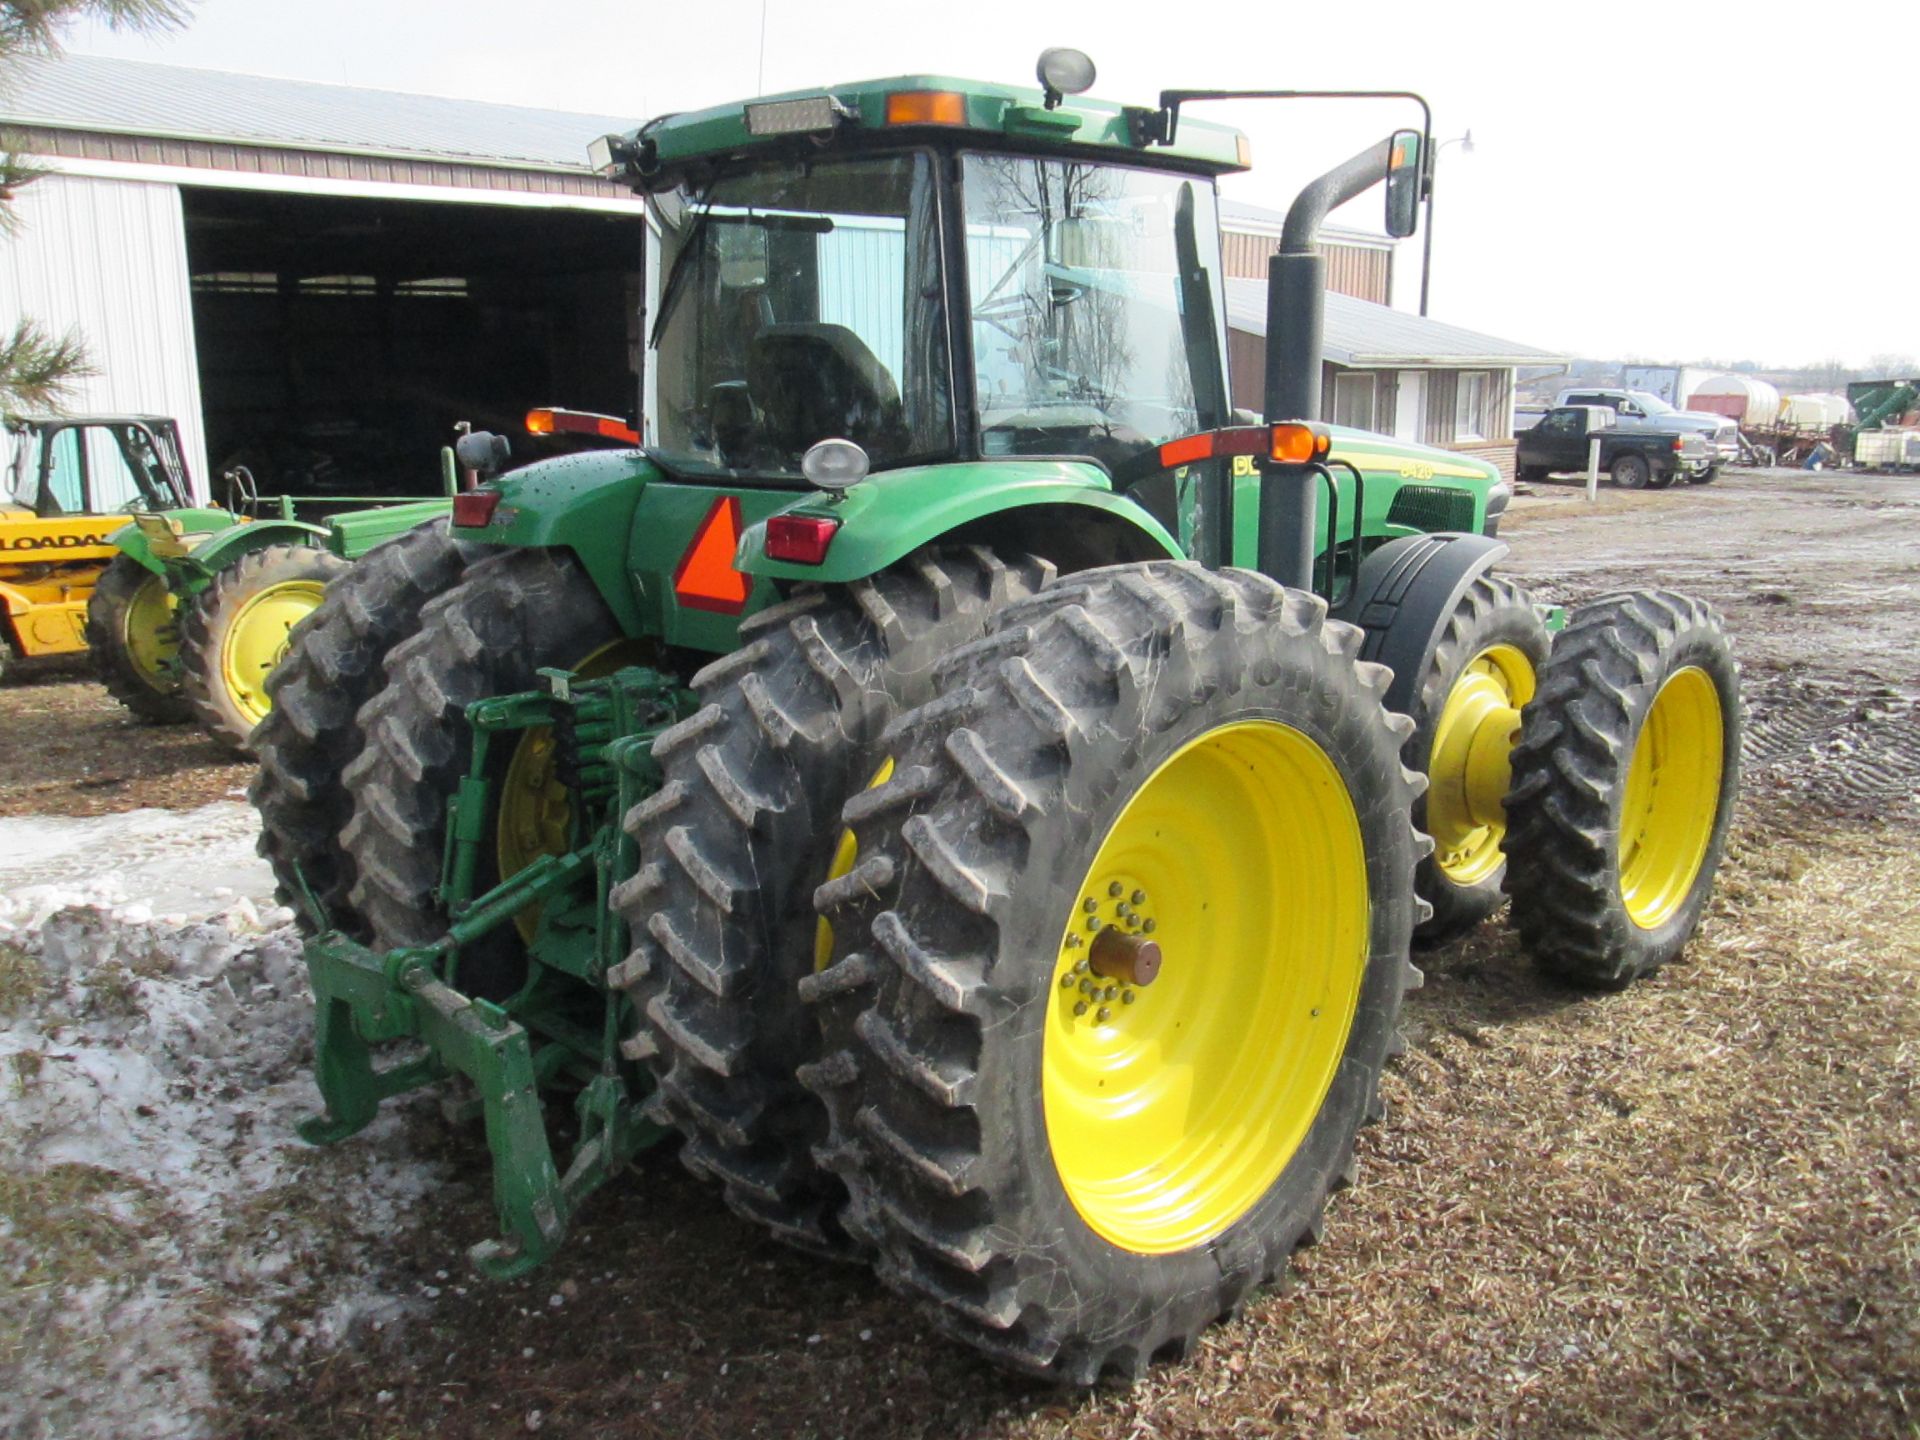 ’02 JD 8420 MFWD,(SN RW8420P007155)P.S.,FRONT SUSPENSION,GREENSTAR READY,480X50 DUALS,4921 HRS. - Image 3 of 19